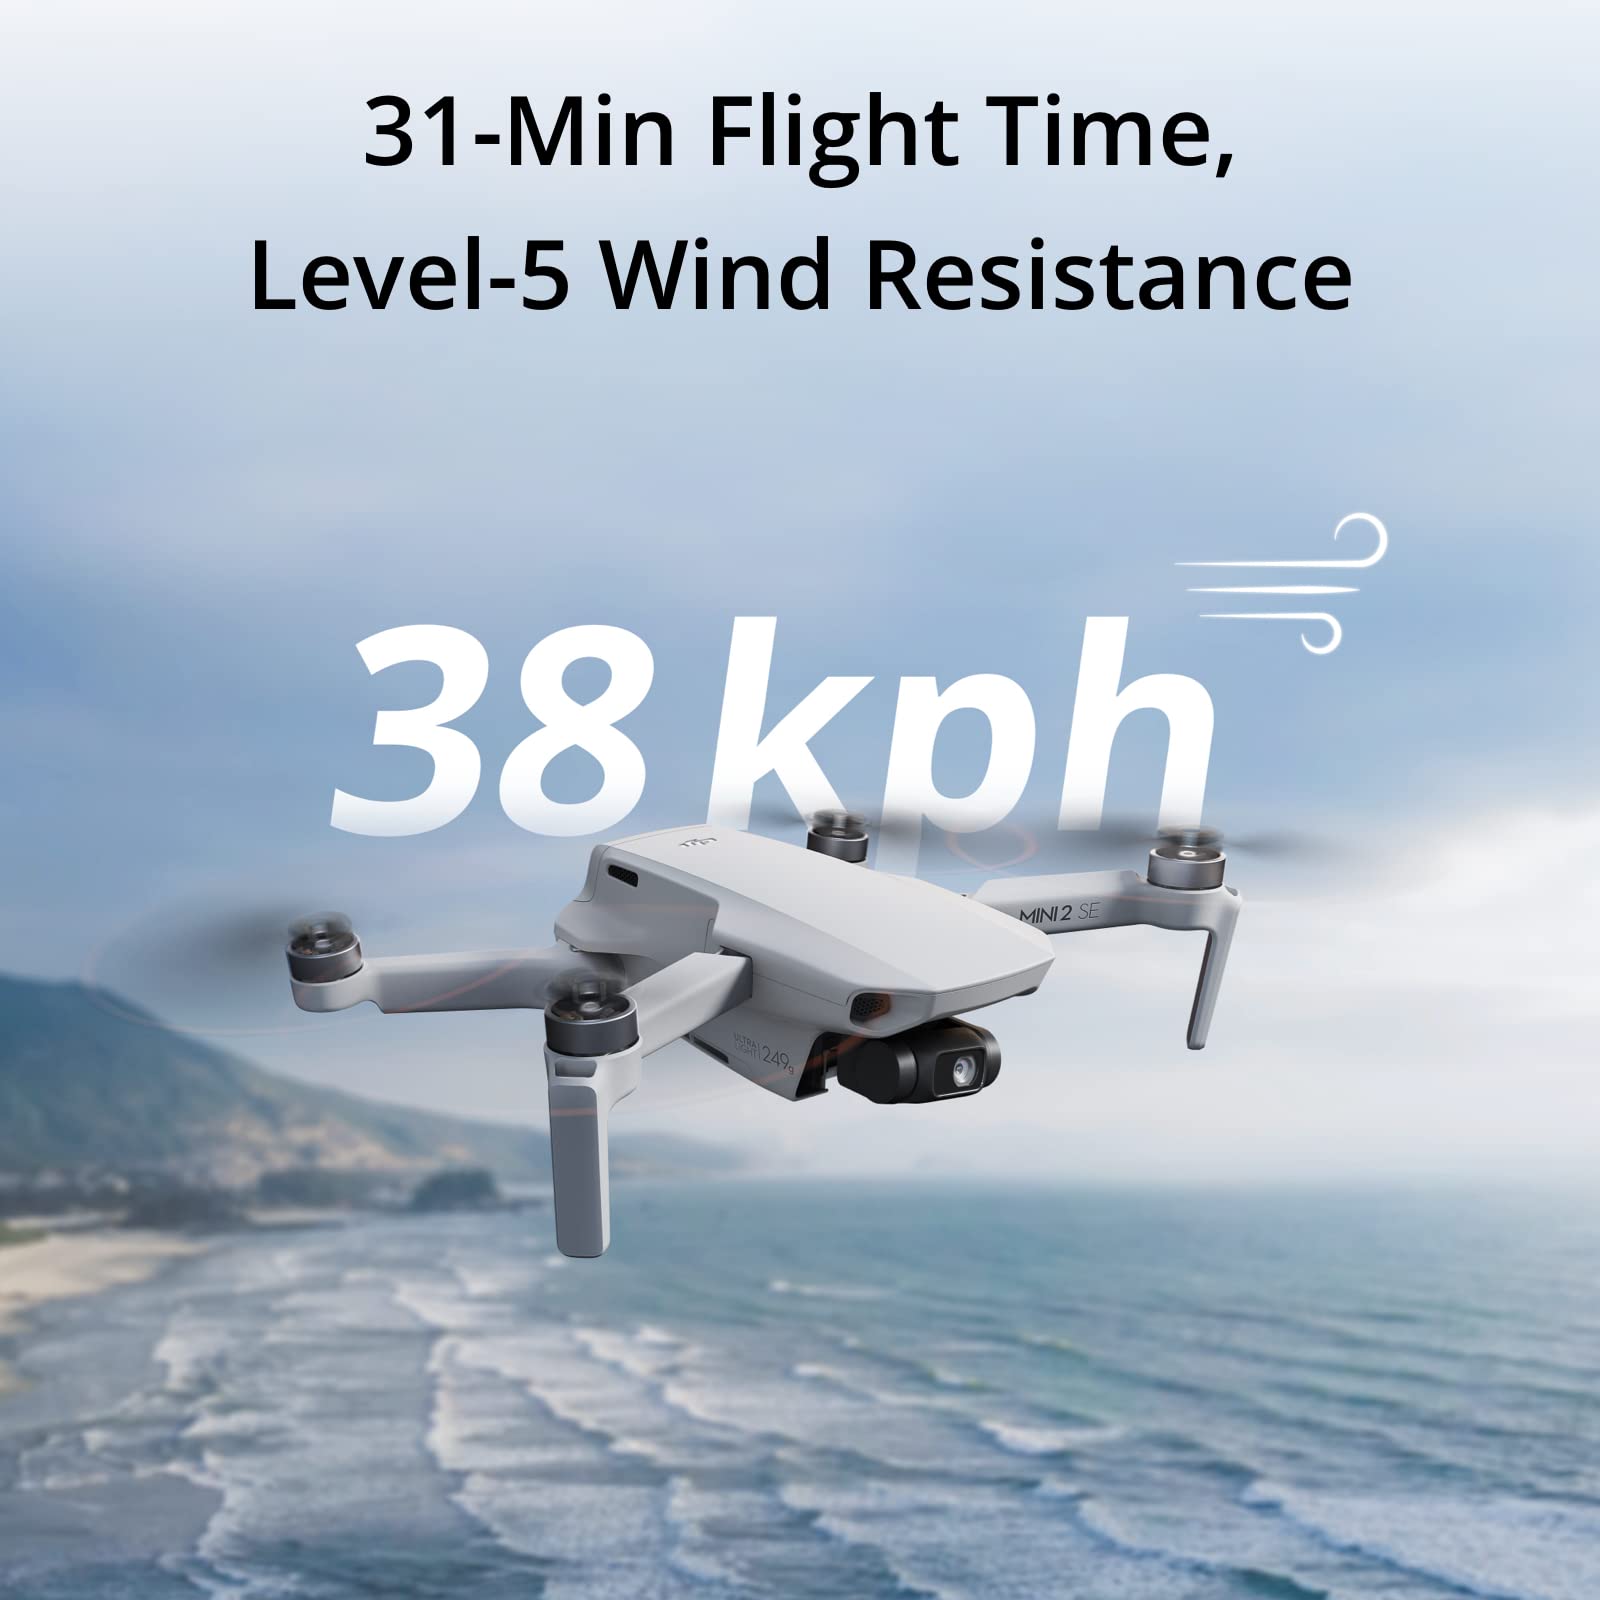 DJI Mini 2 SE, Lightweight Mini Drone with QHD Video, 10km Max Video Transmission, 31-Min Flight Time, Under 249 g, Auto Return to Home, 3-Axis Gimbal Drone with EIS, Drone with Camera for Beginners